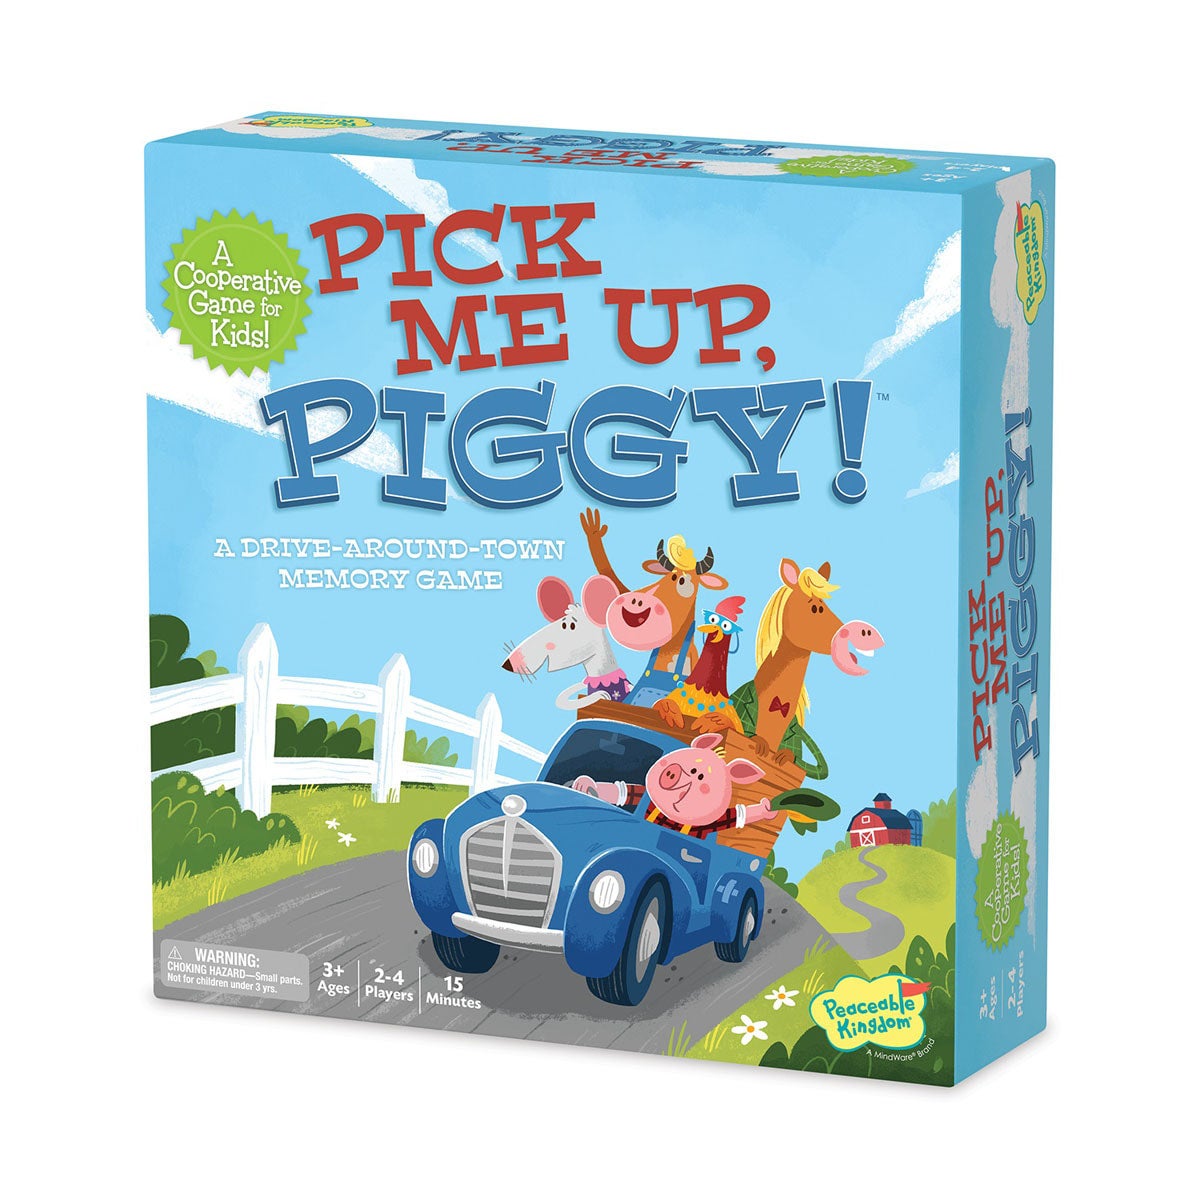 Pick Me Up Piggy - The Co-Operative Game